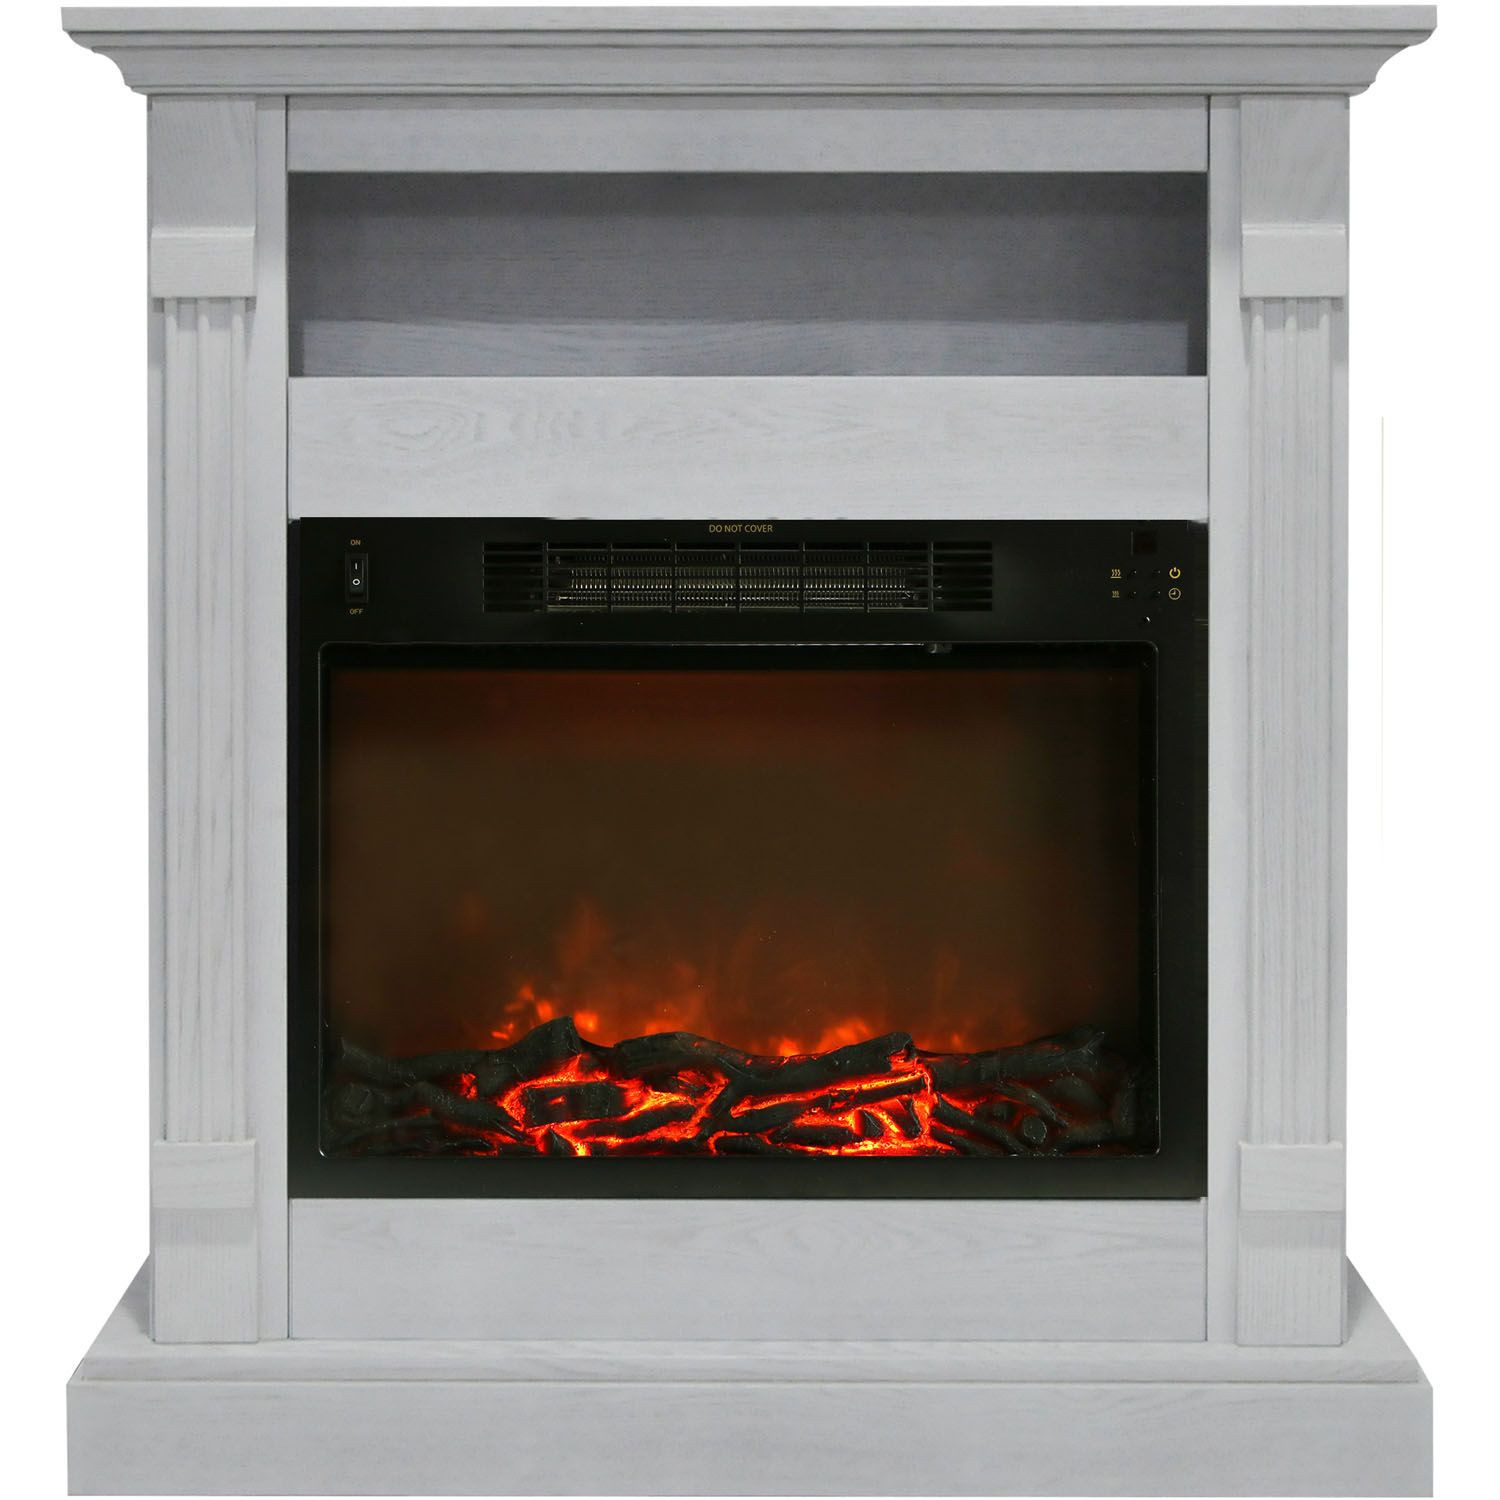 Electric Fireplace Sears
 18 Inspirational Sears Electric Fireplace